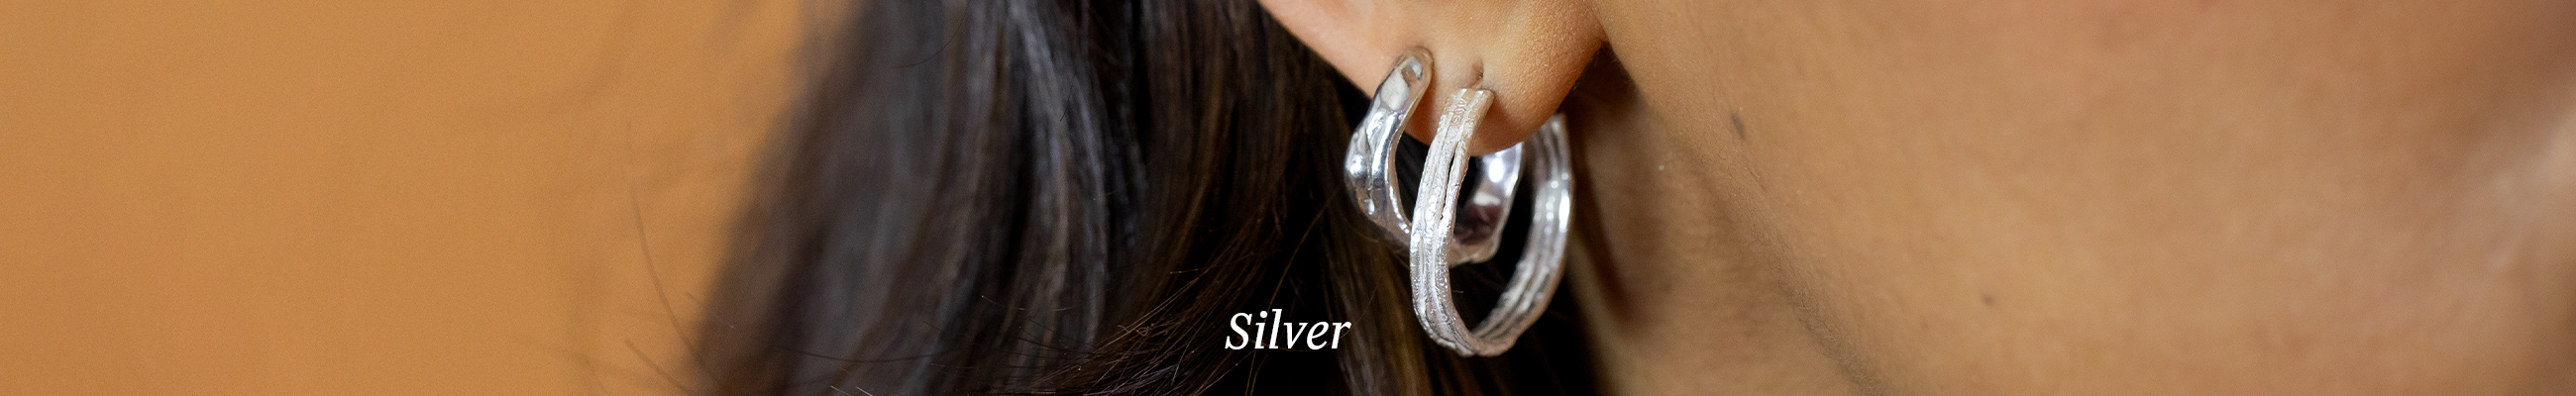 d645eea1-2194-4c22-a7ee-574f255af24dCollection_Banner_Material_Silver-2.jpg